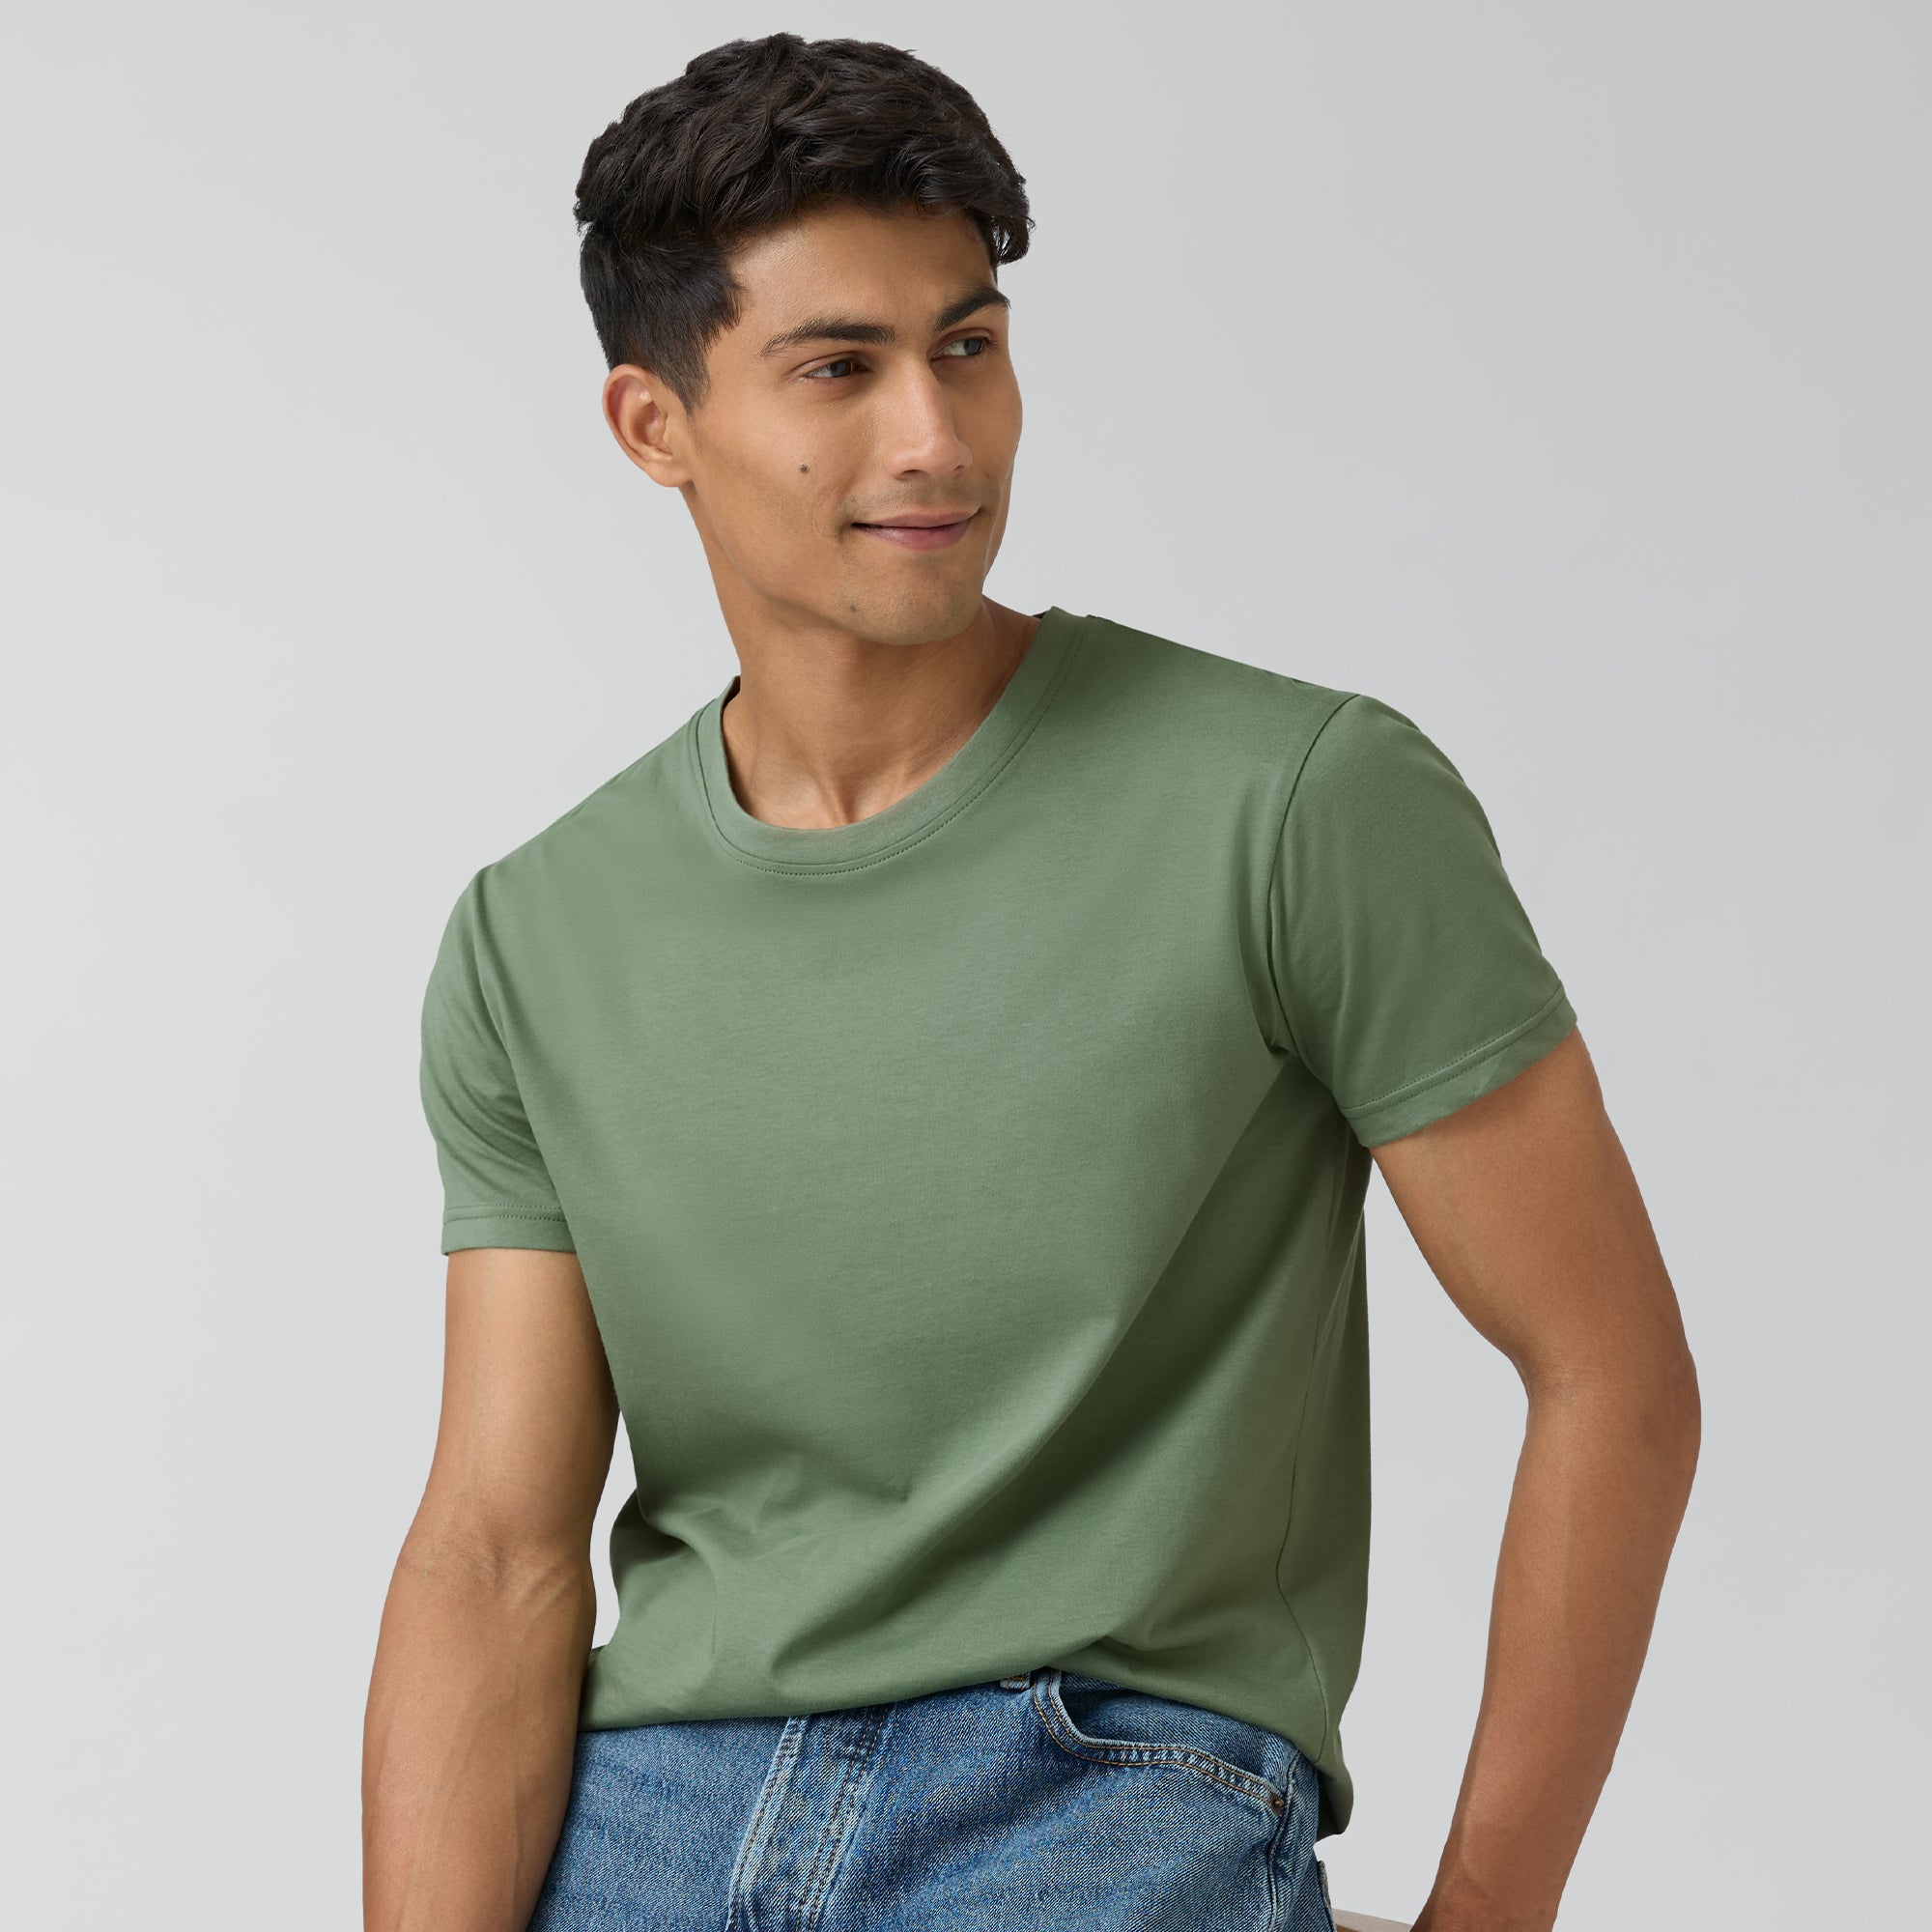 Pace Combed Cotton T-shirts For Men Sage Green -  XYXX Crew